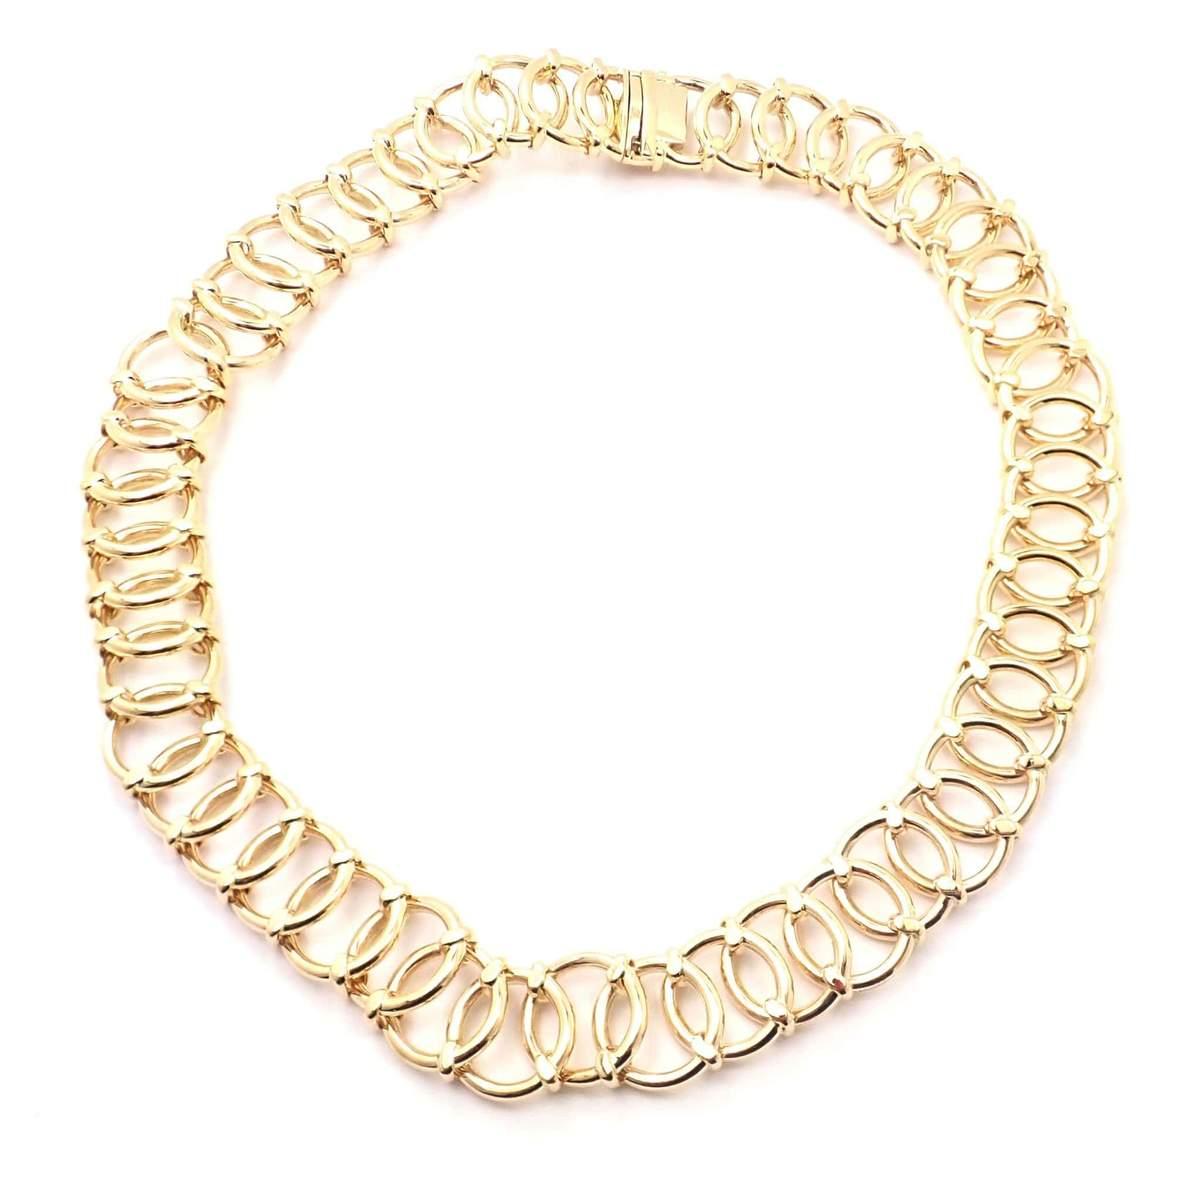 18K Yellow Gold Open Circle Link Chain Necklace by Paloma Picasso for Tiffany & Co. France
Metal: 18k Yellow Gold
Length: 16